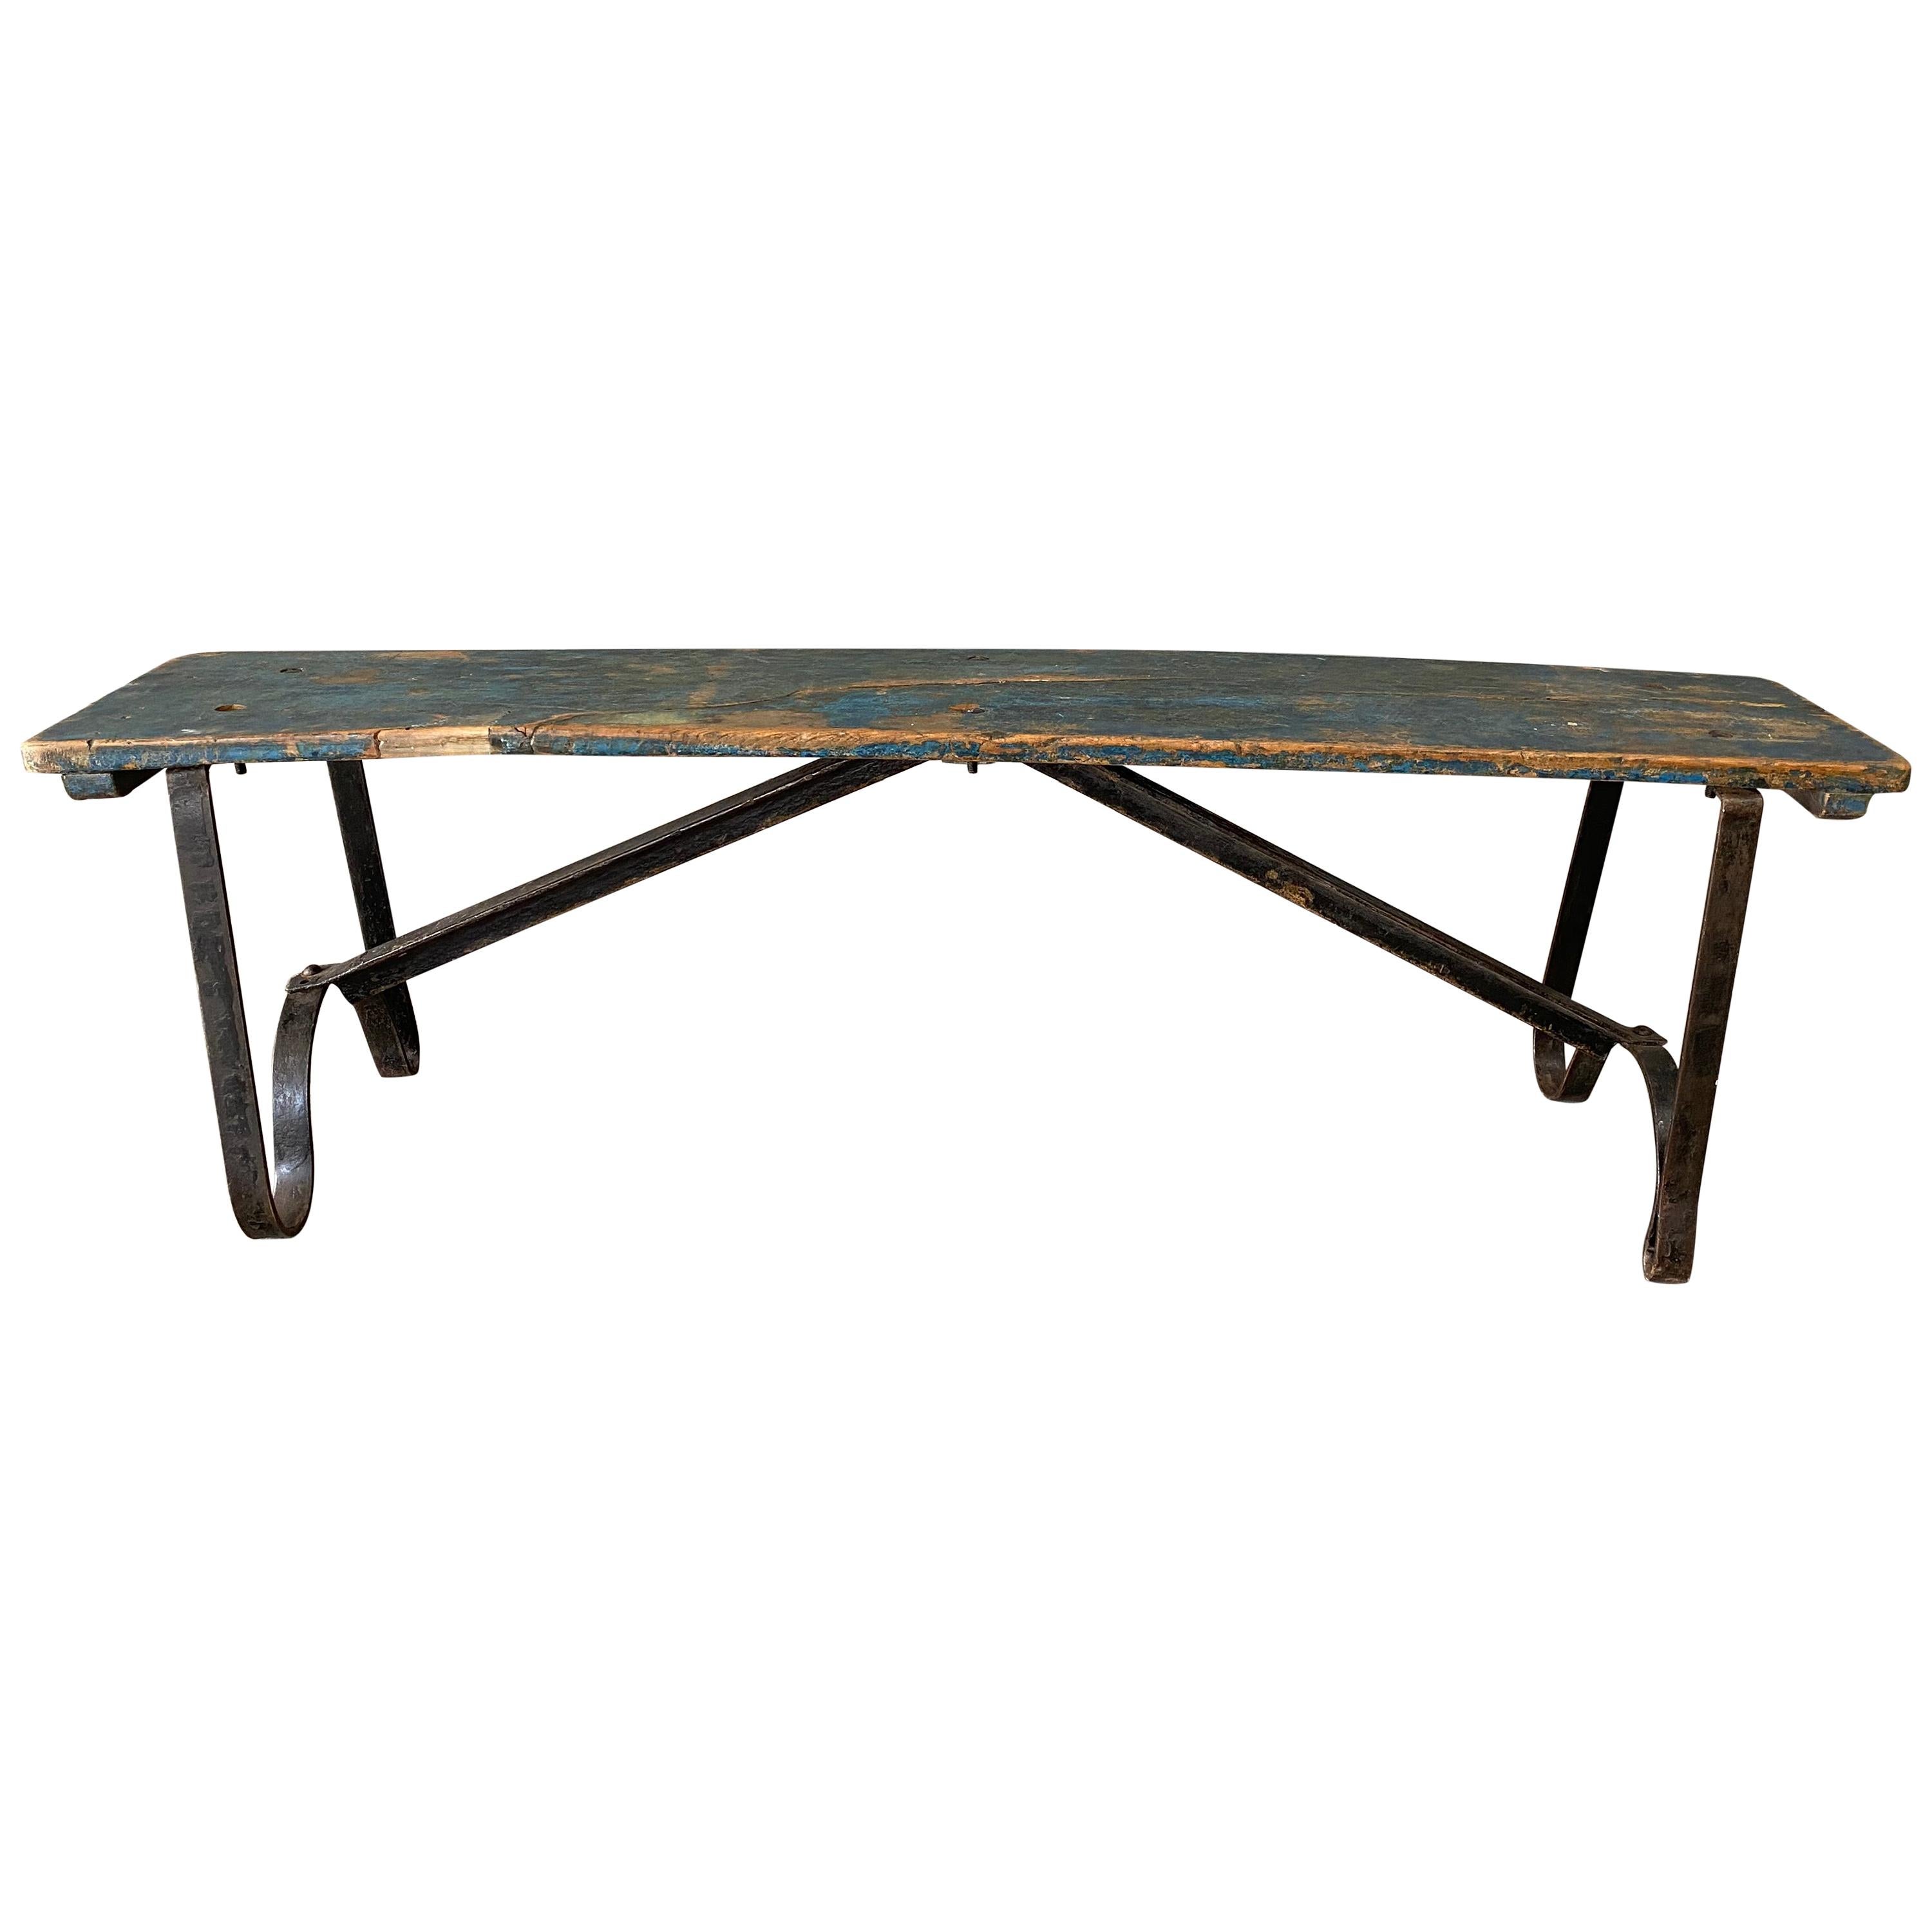 Distressed French Industrial Bench